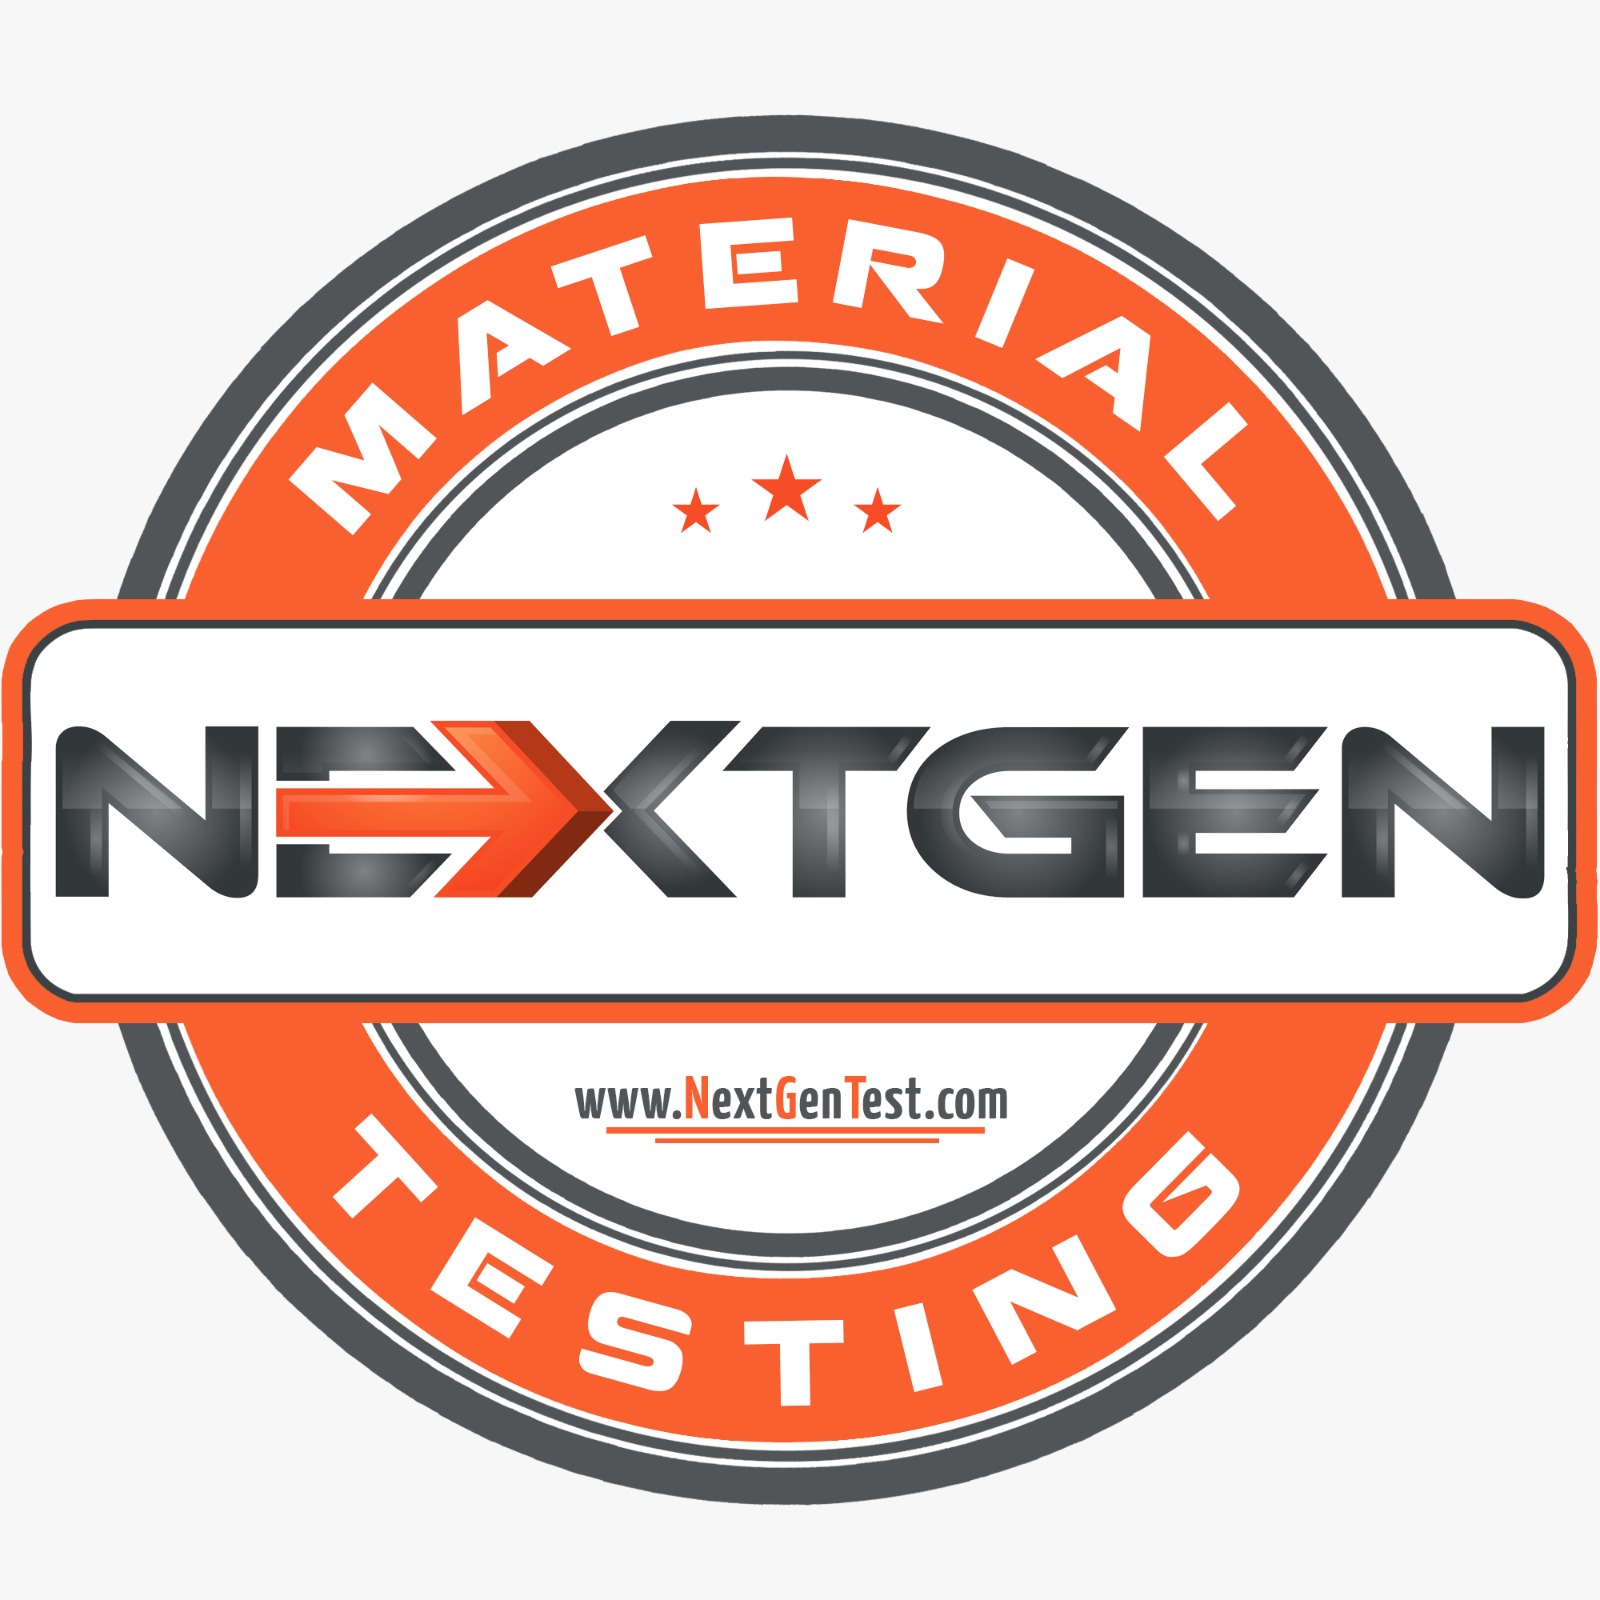 NextGen Material Testing – Trusted Quality Control Supplier in North America